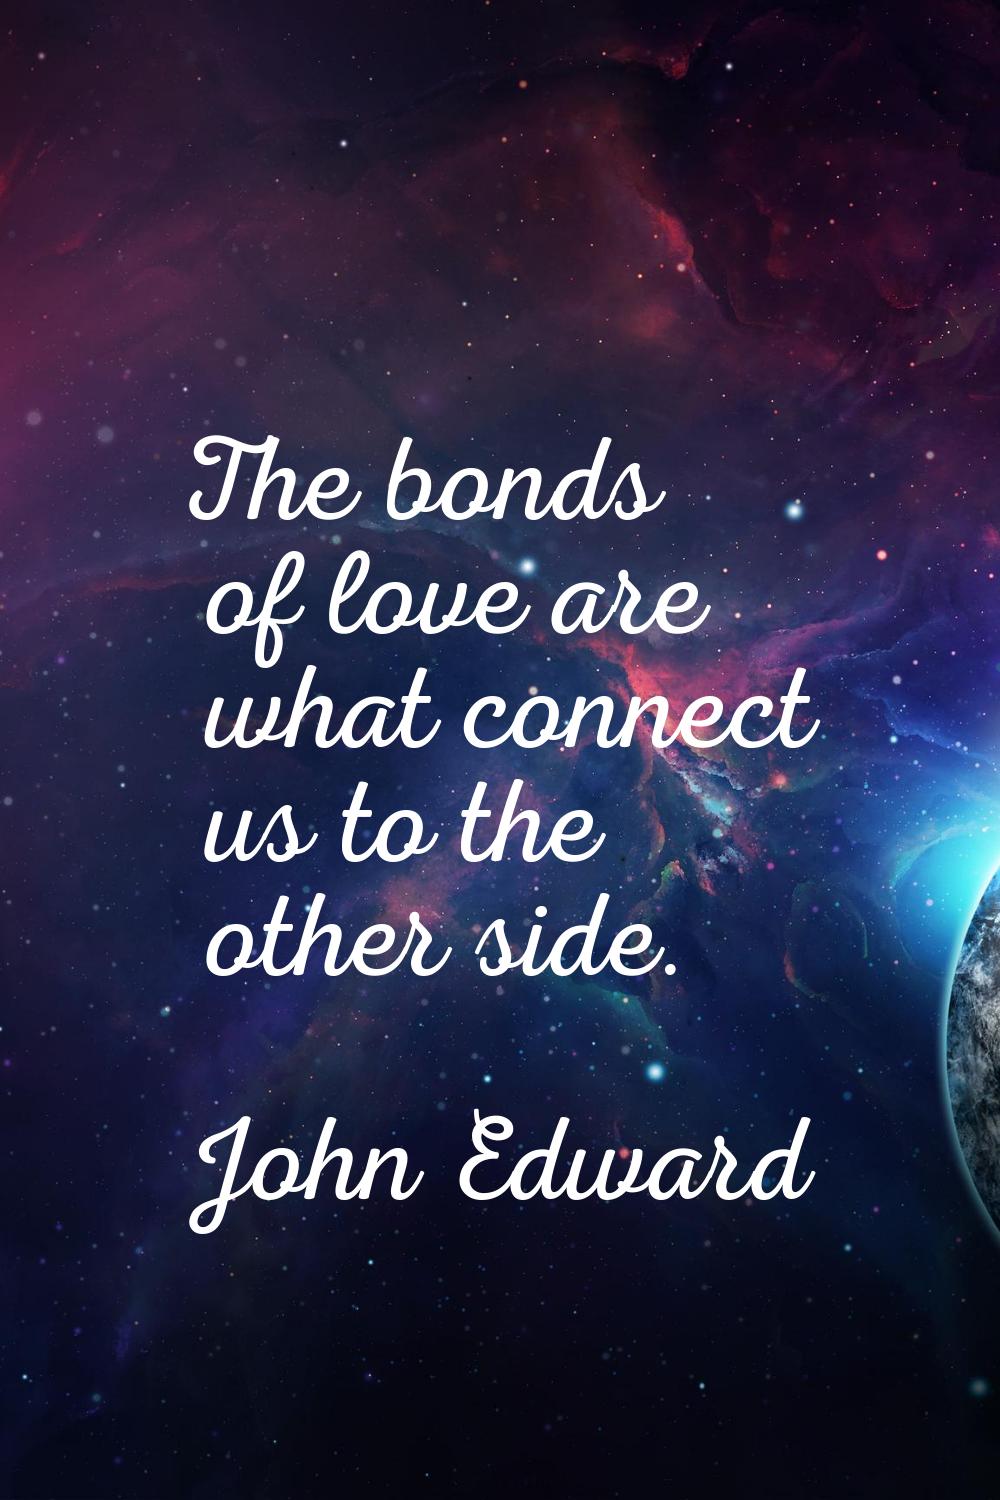 The bonds of love are what connect us to the other side.